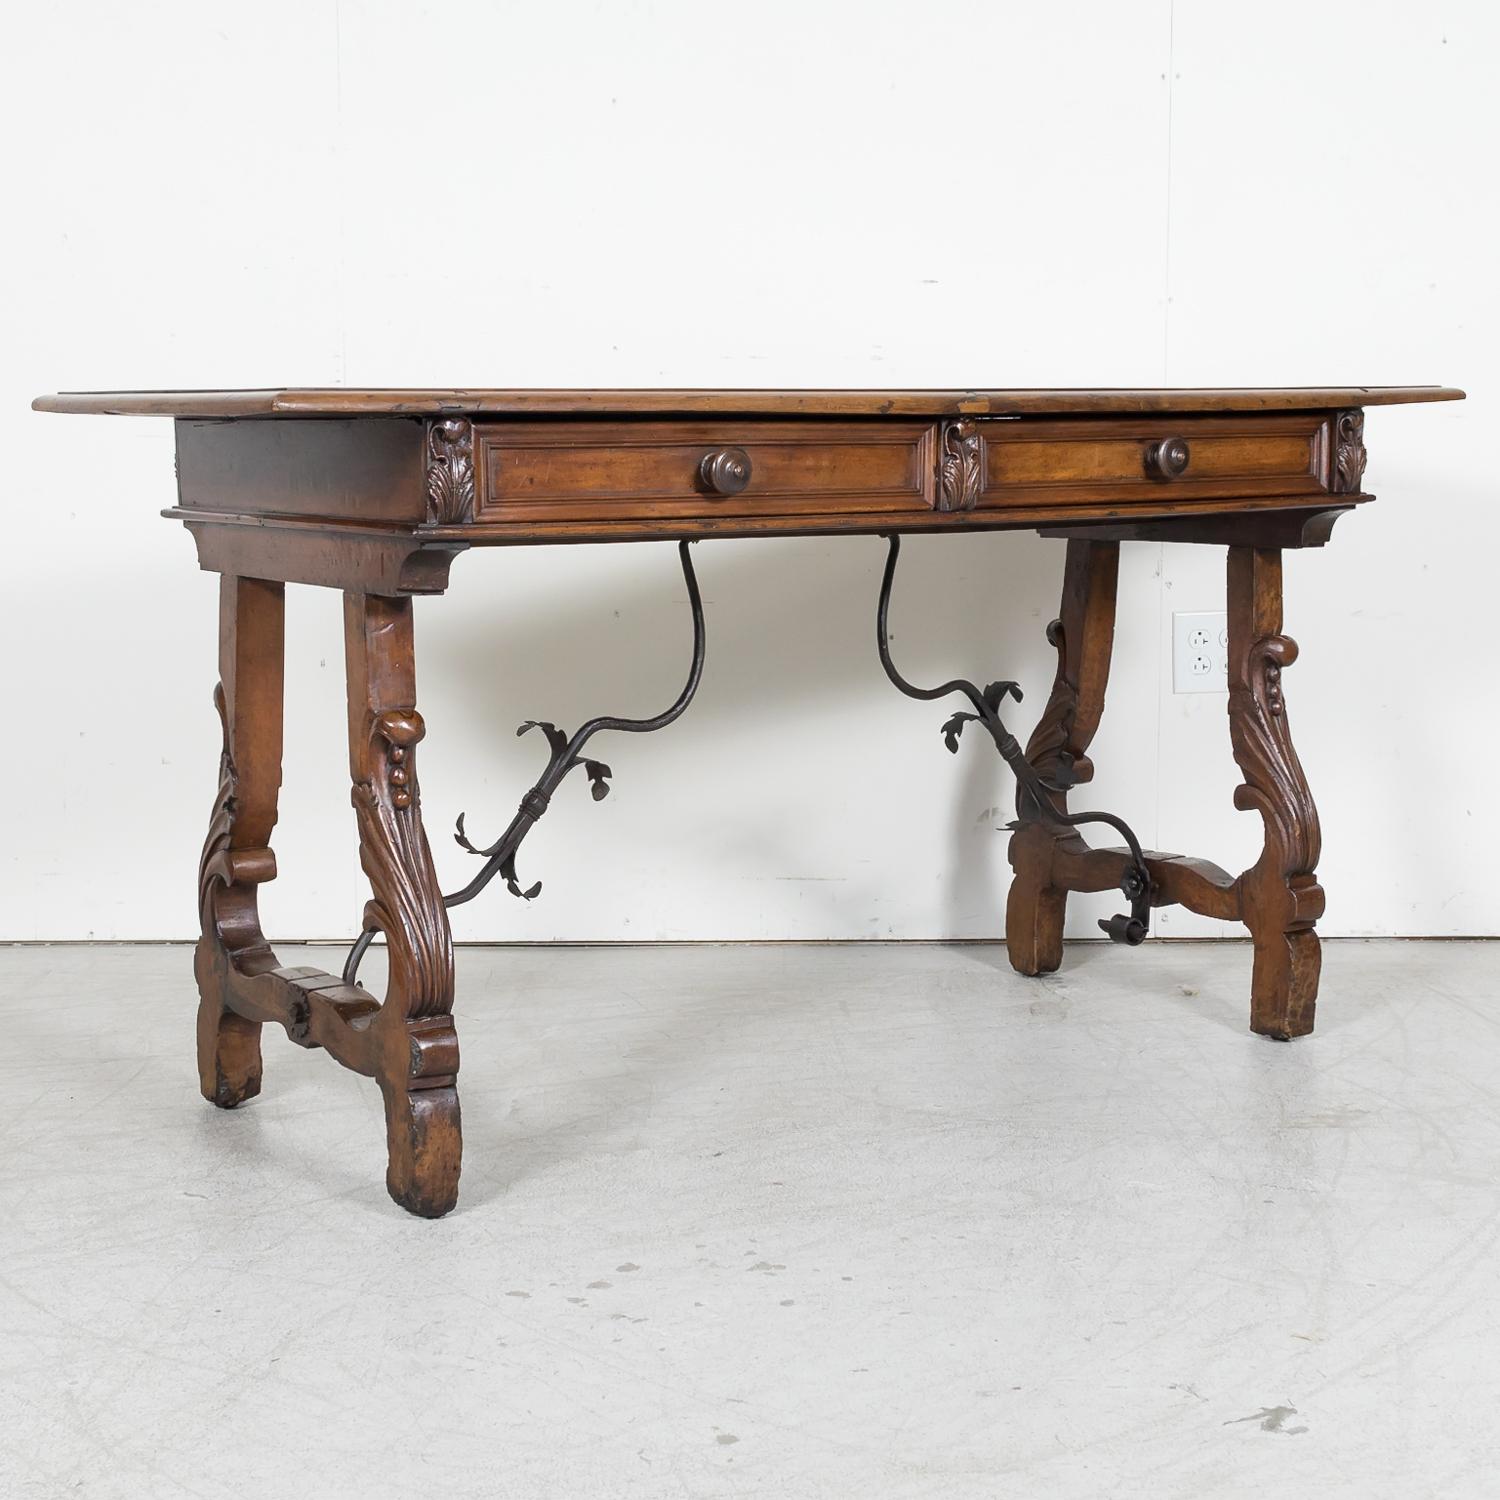 A stunning early 19th century Italian fratino console table handcrafted in the Tuscany region near Florence of solid walnut with intricate details and timeless design, circa 1800. Having a beveled edge rectangular top above a carved frieze featuring